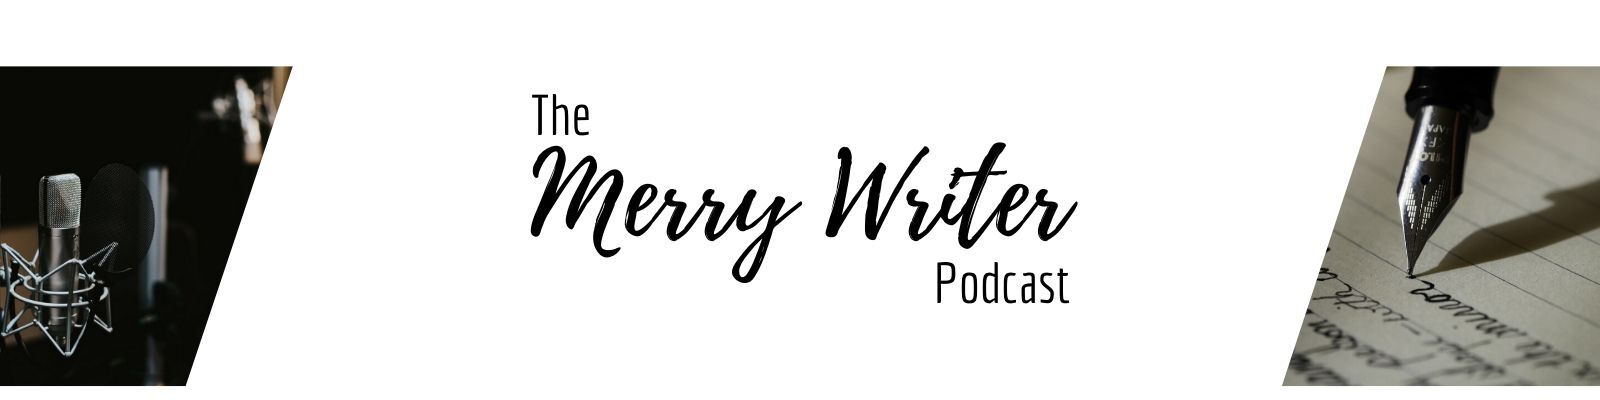 The Merry Writer Podcast